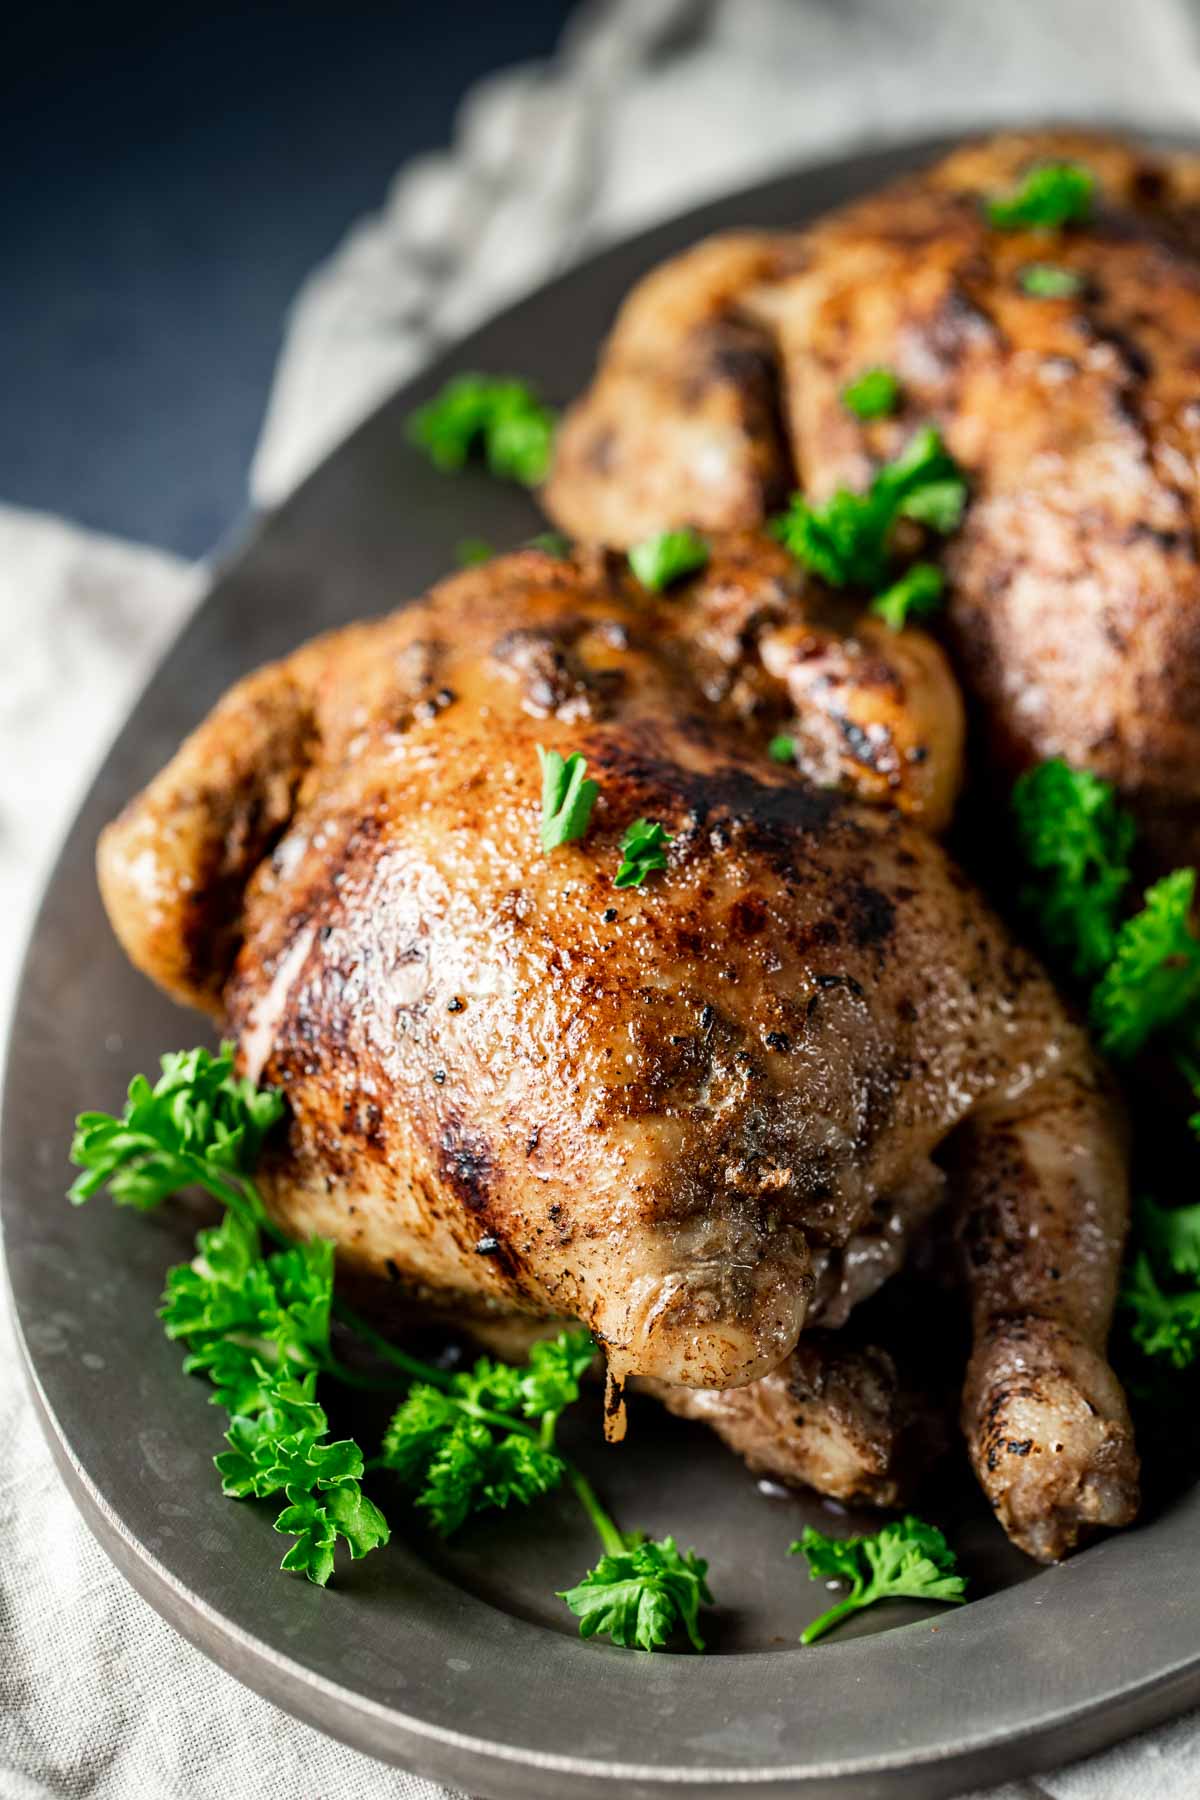 Cornish hens served on a platter with green herbs.